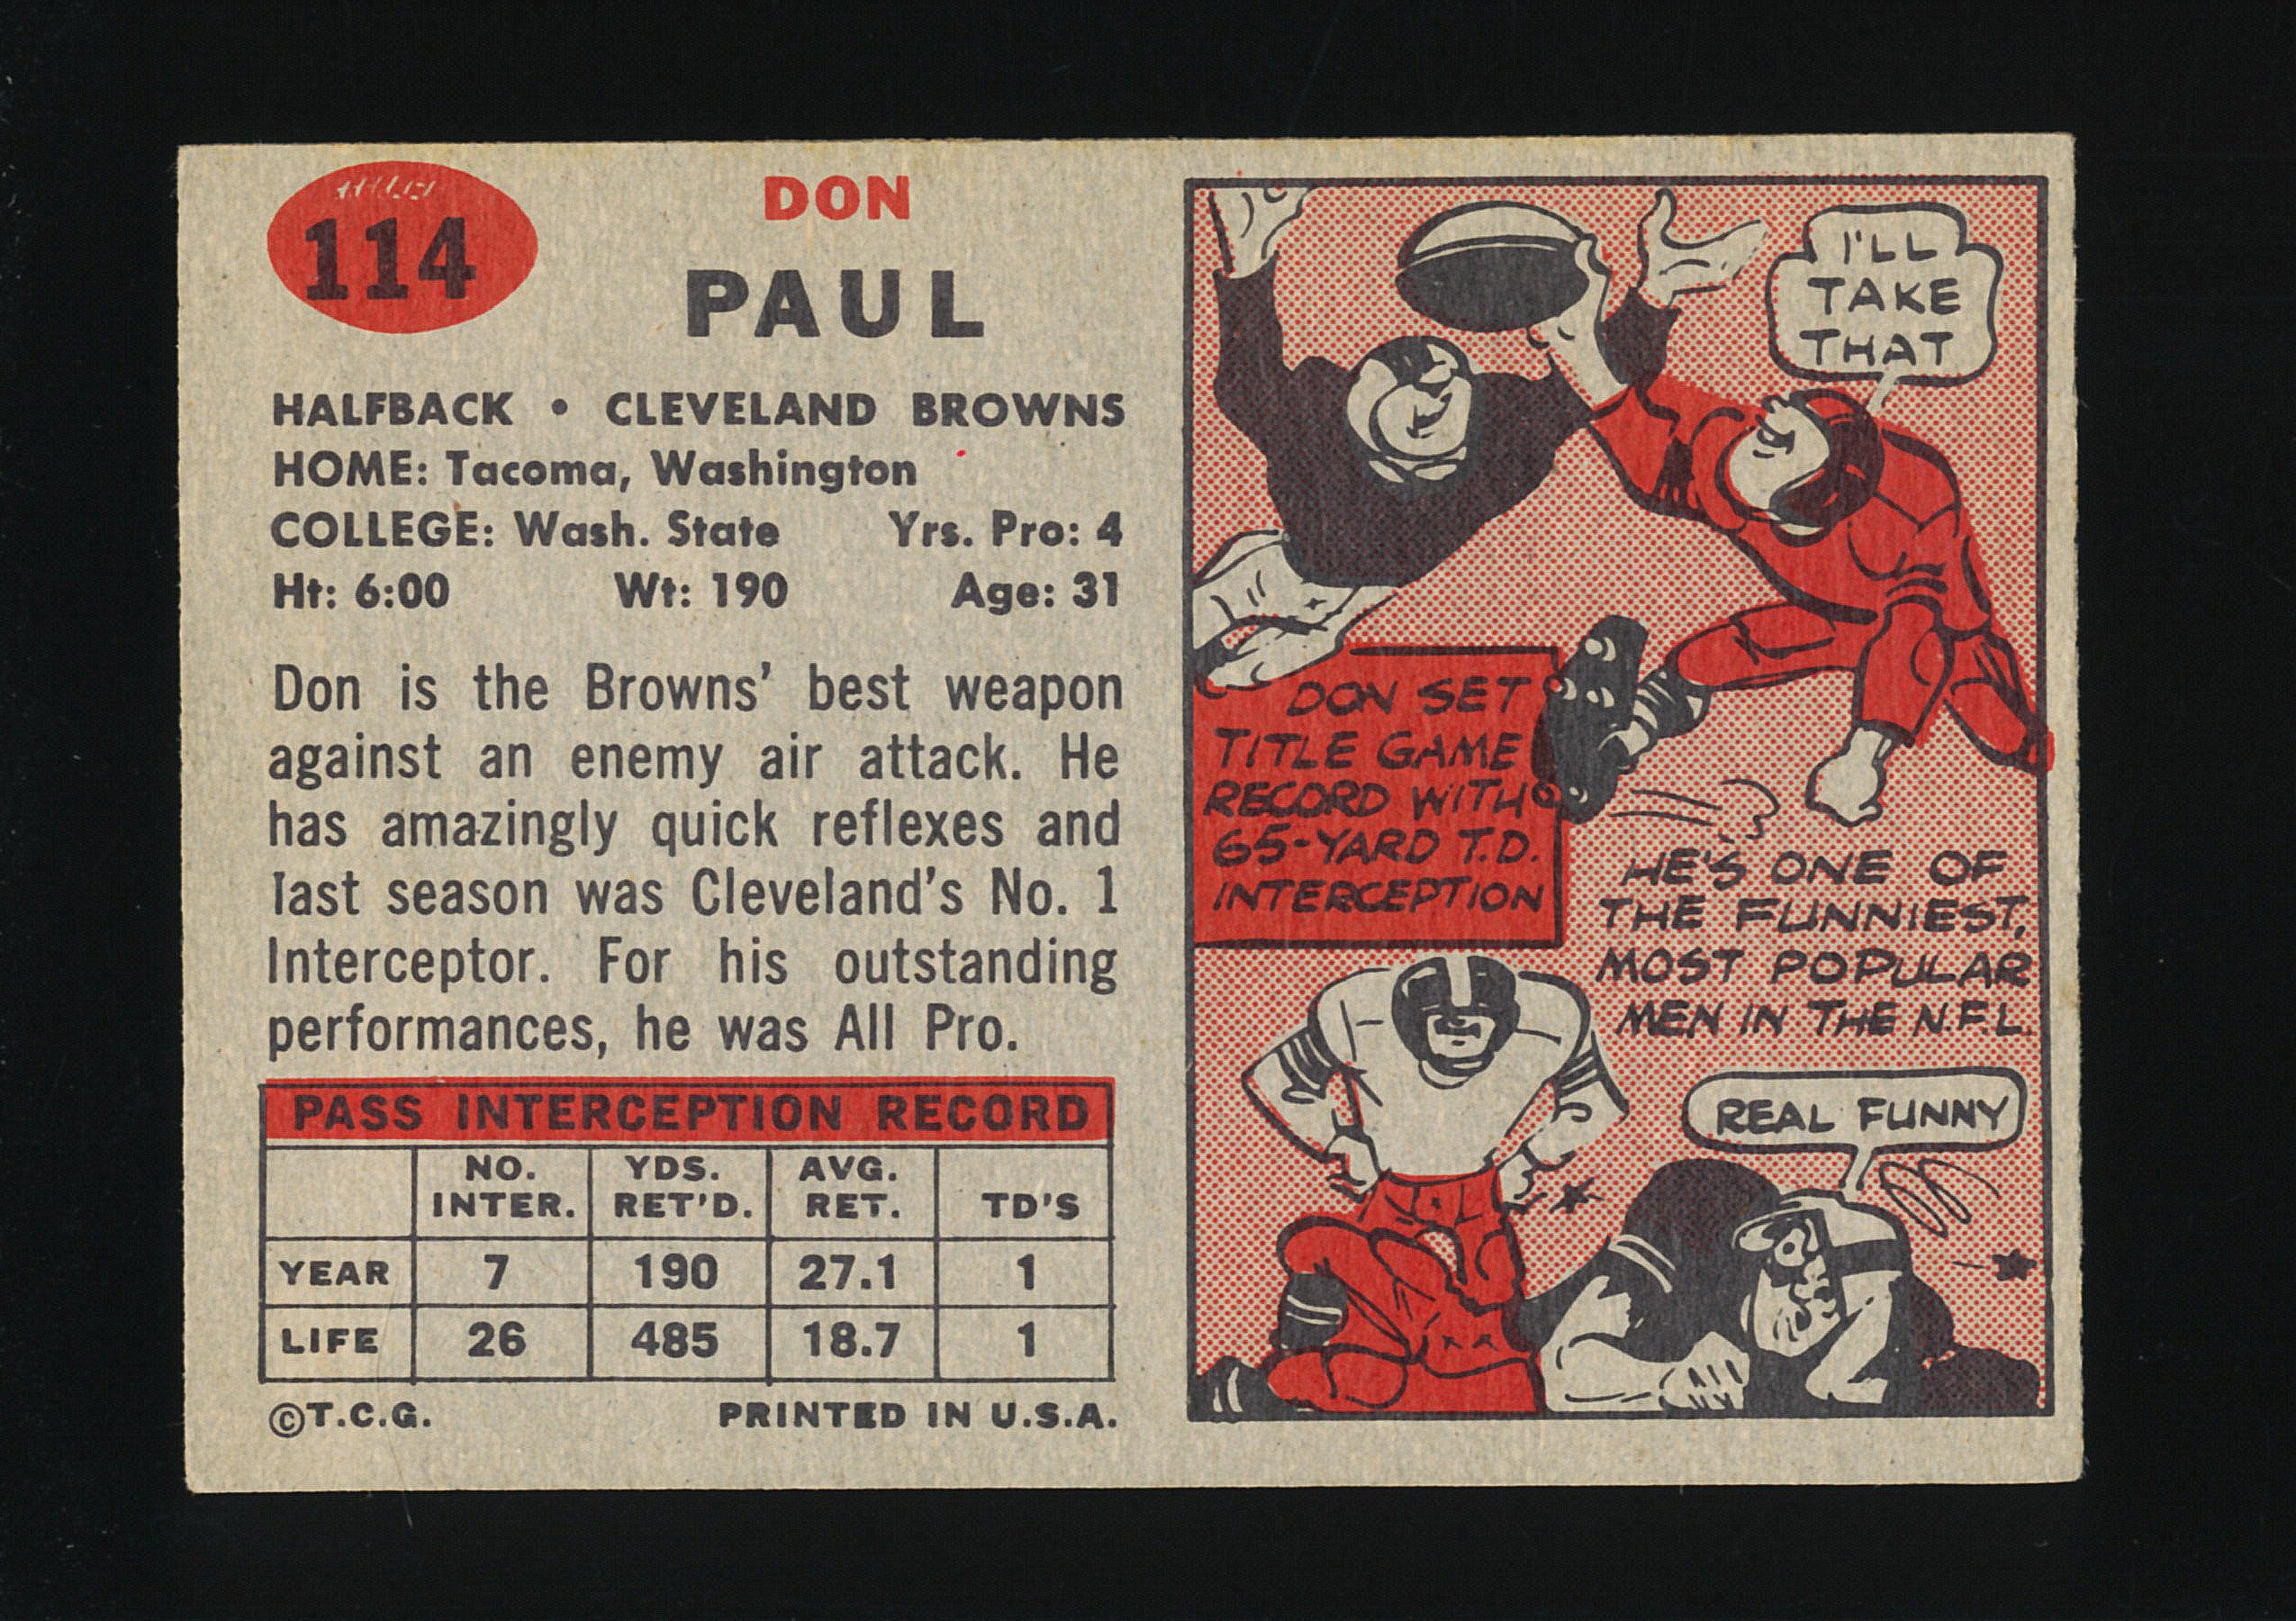 1957 Topps Football Card #114 Don Paul Cleveland Browns